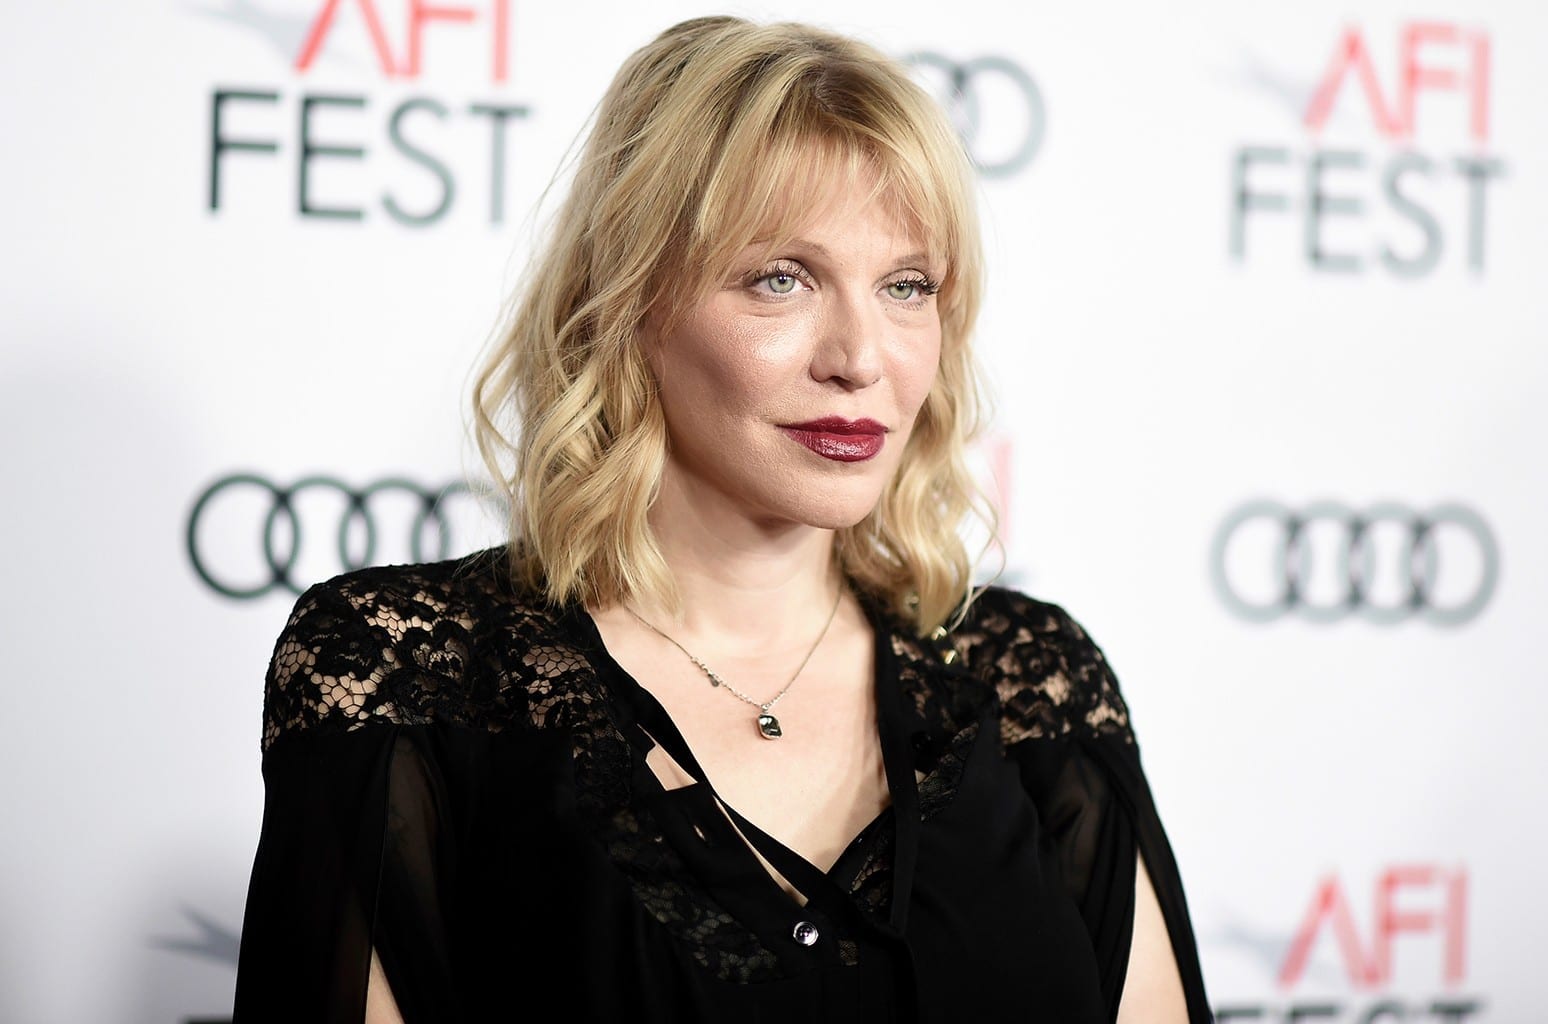 Courtney Love Almost Lost Her Life In 2020